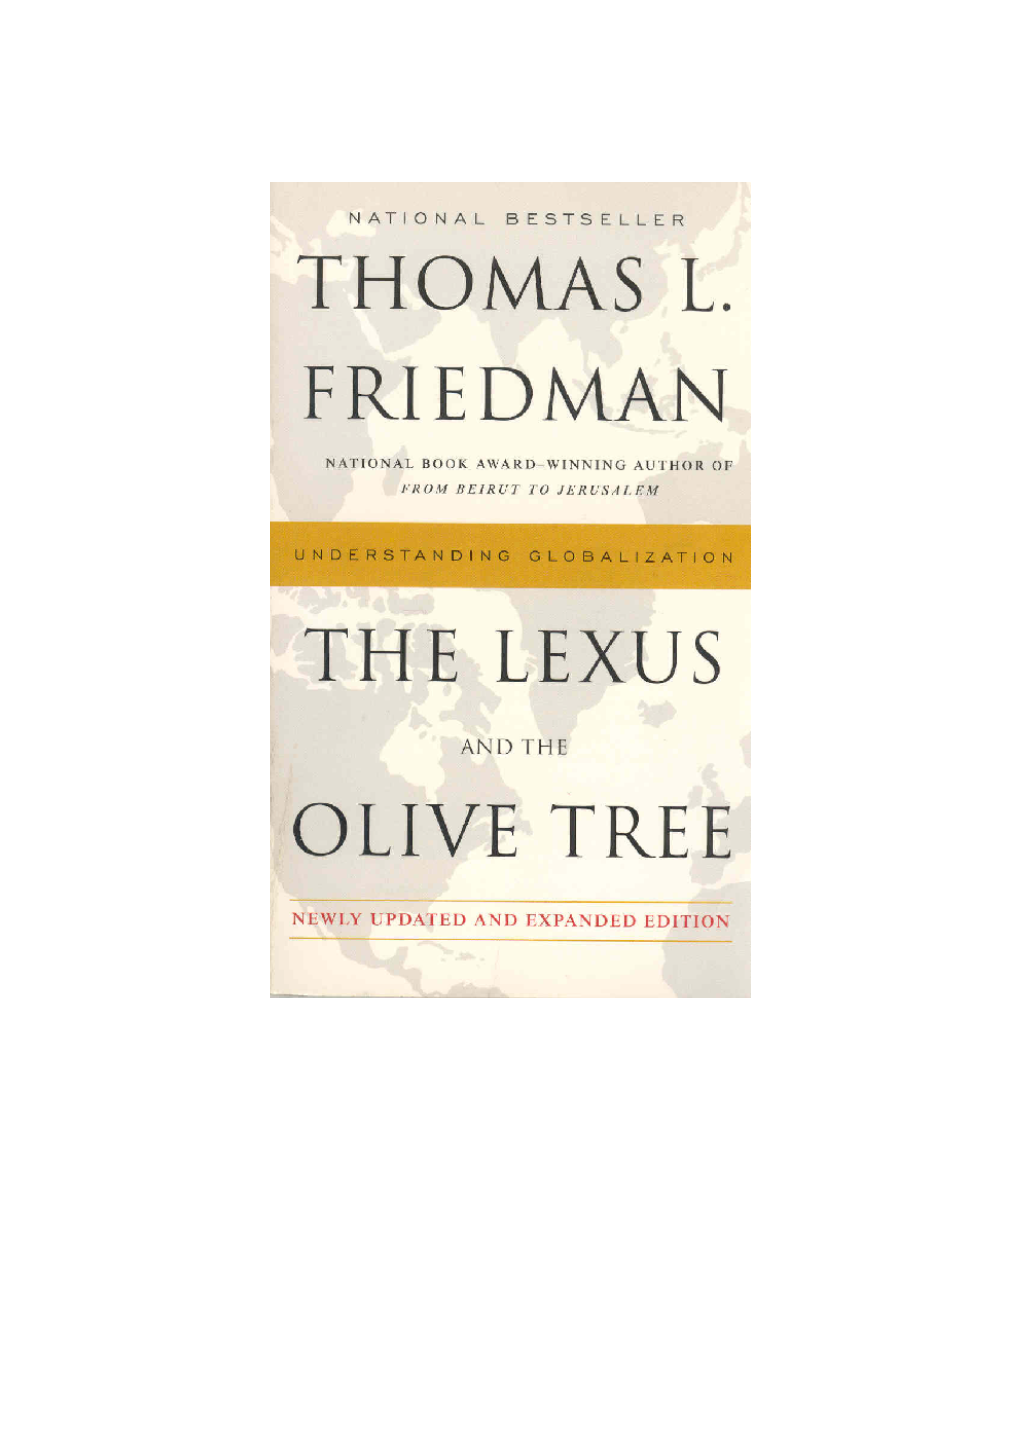 The Lexus and the Olive Tree / by Thomas L